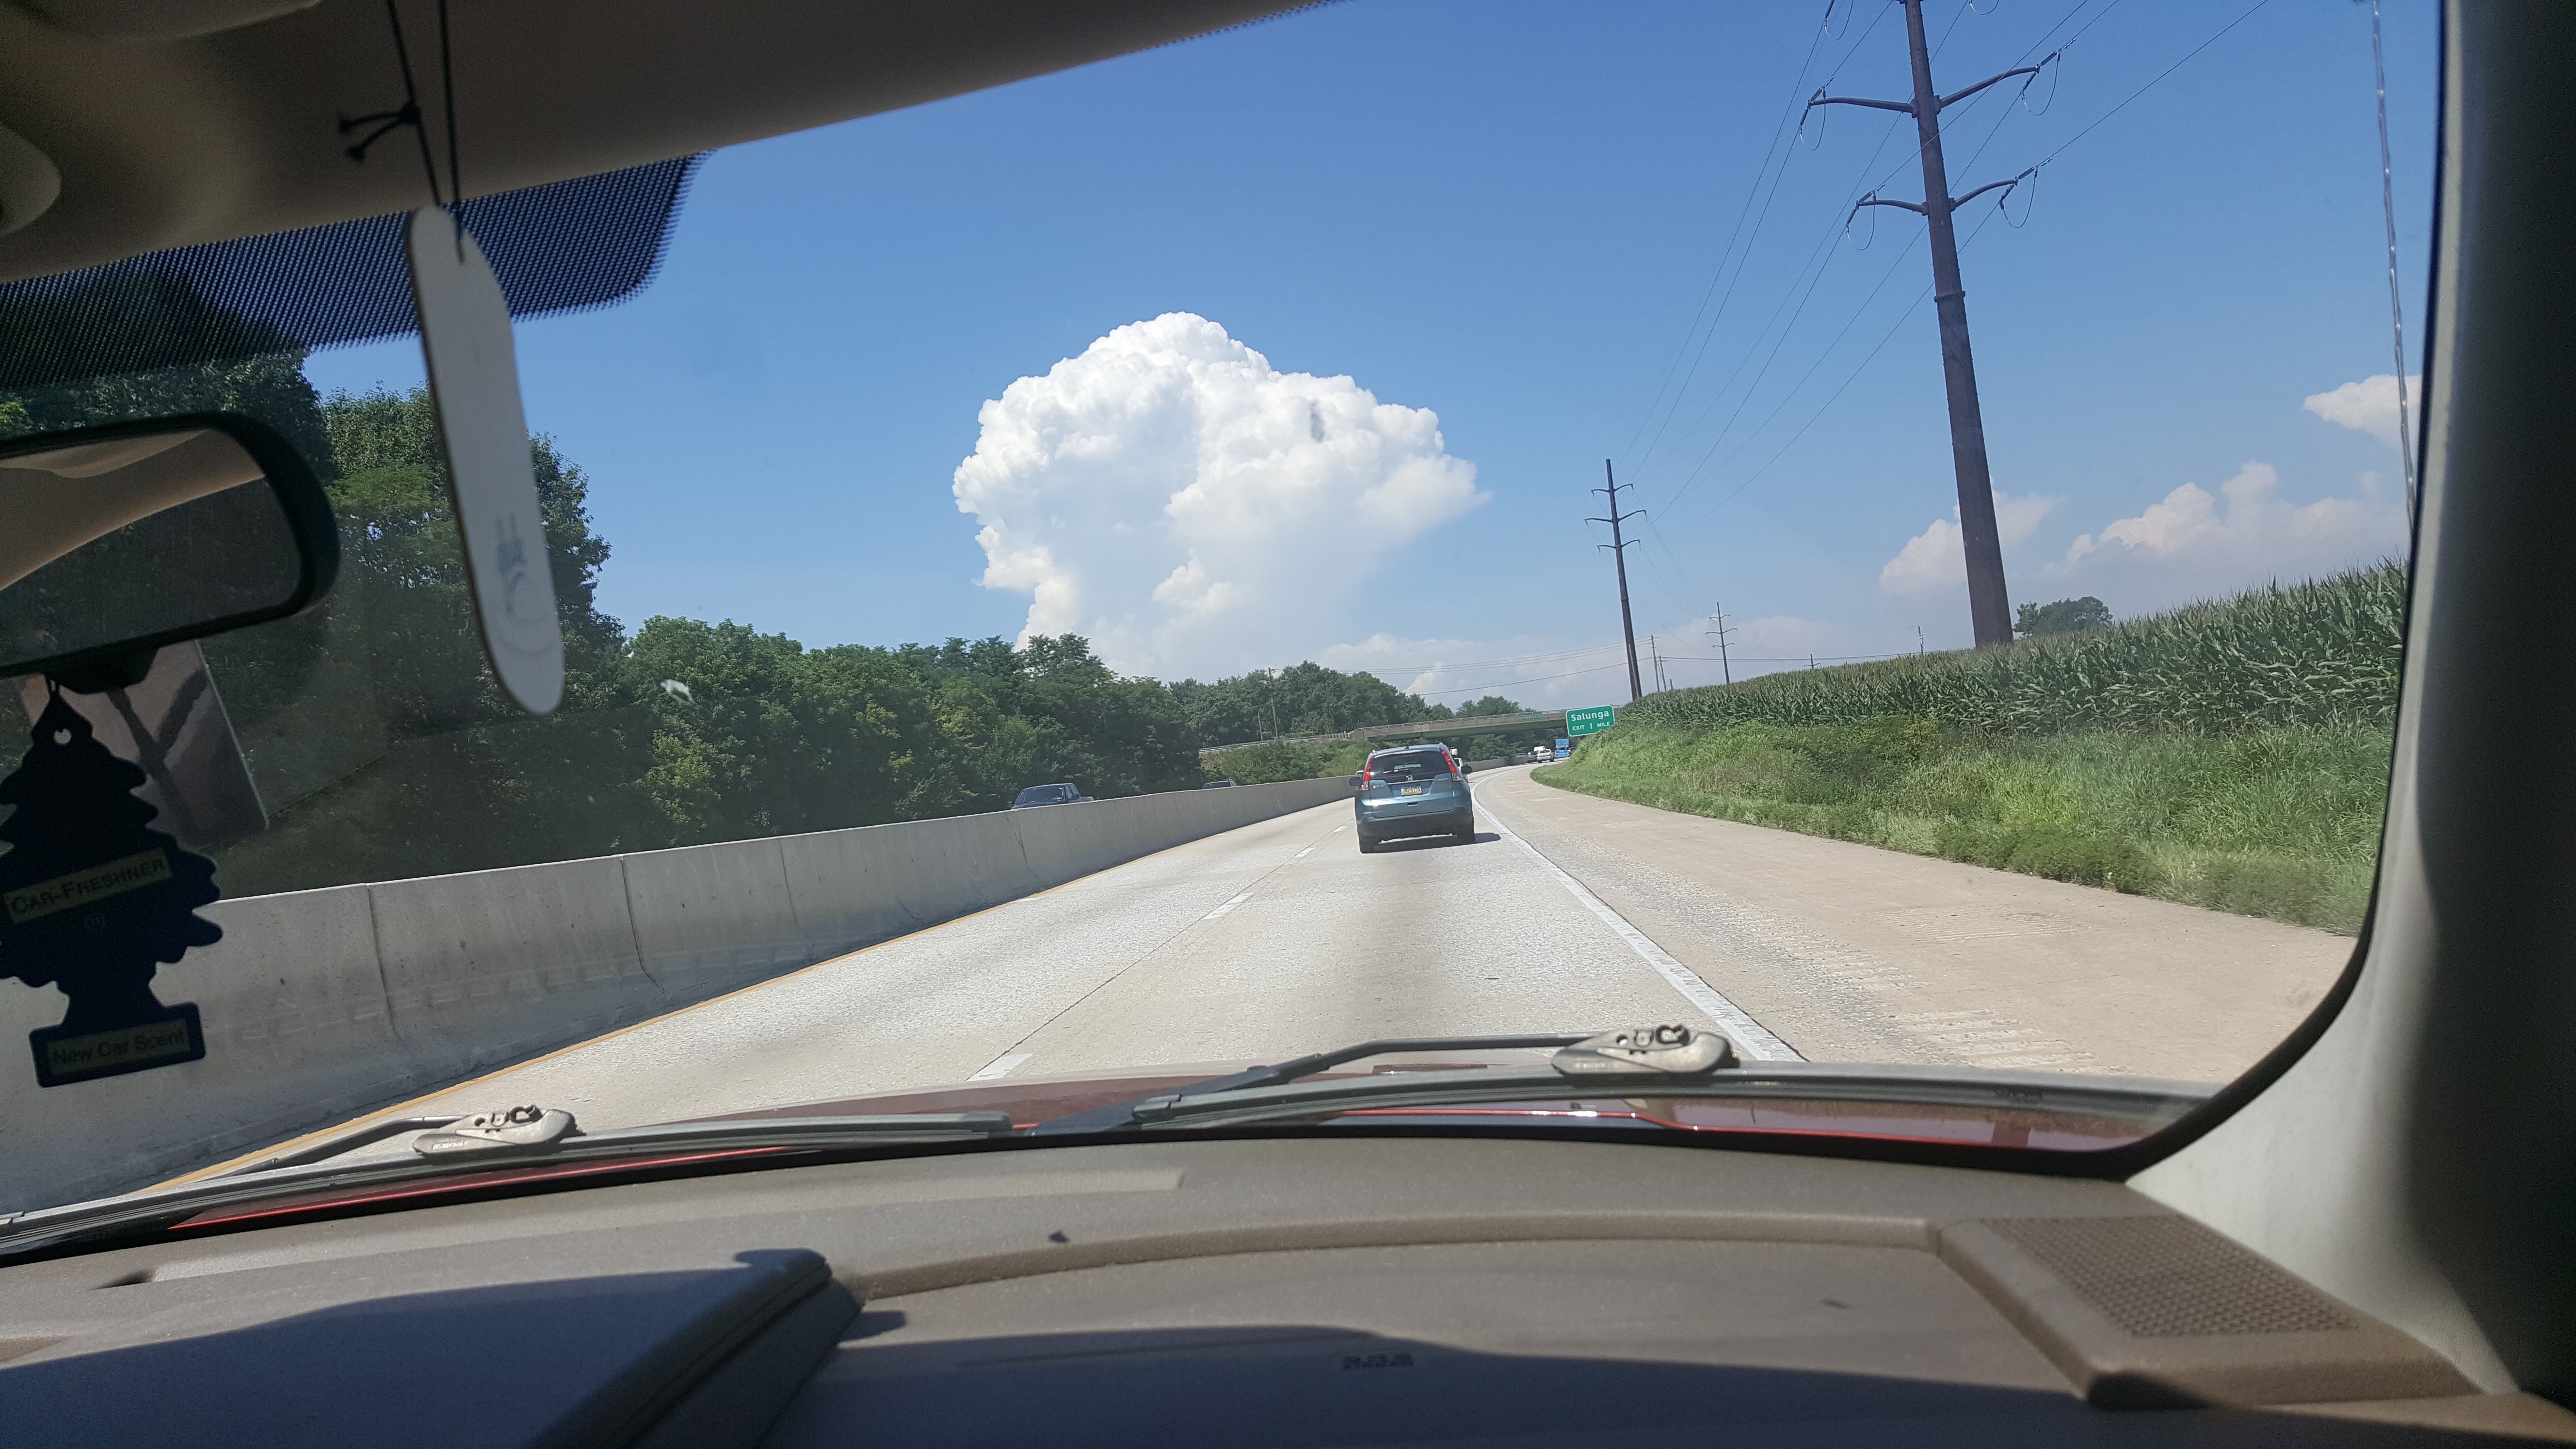 This photo is the early stages of a thunderstorm from 30 miles away.